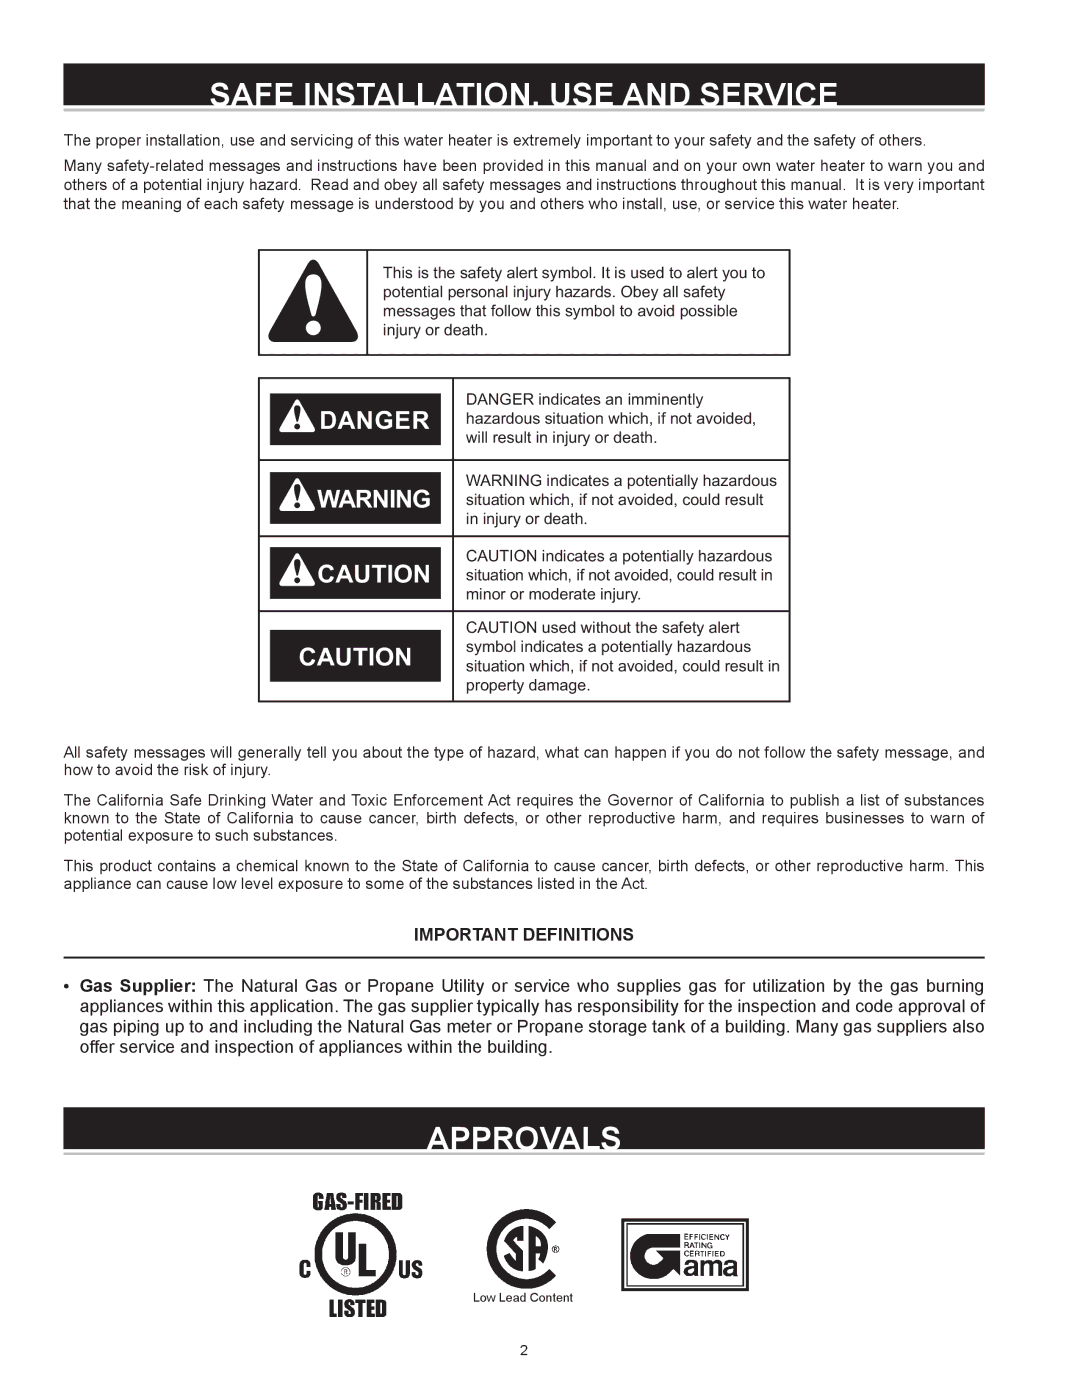 State Industries SHE 50 76N instruction manual Safe INSTALLATION, USE and Service, Approvals, Important Definitions 